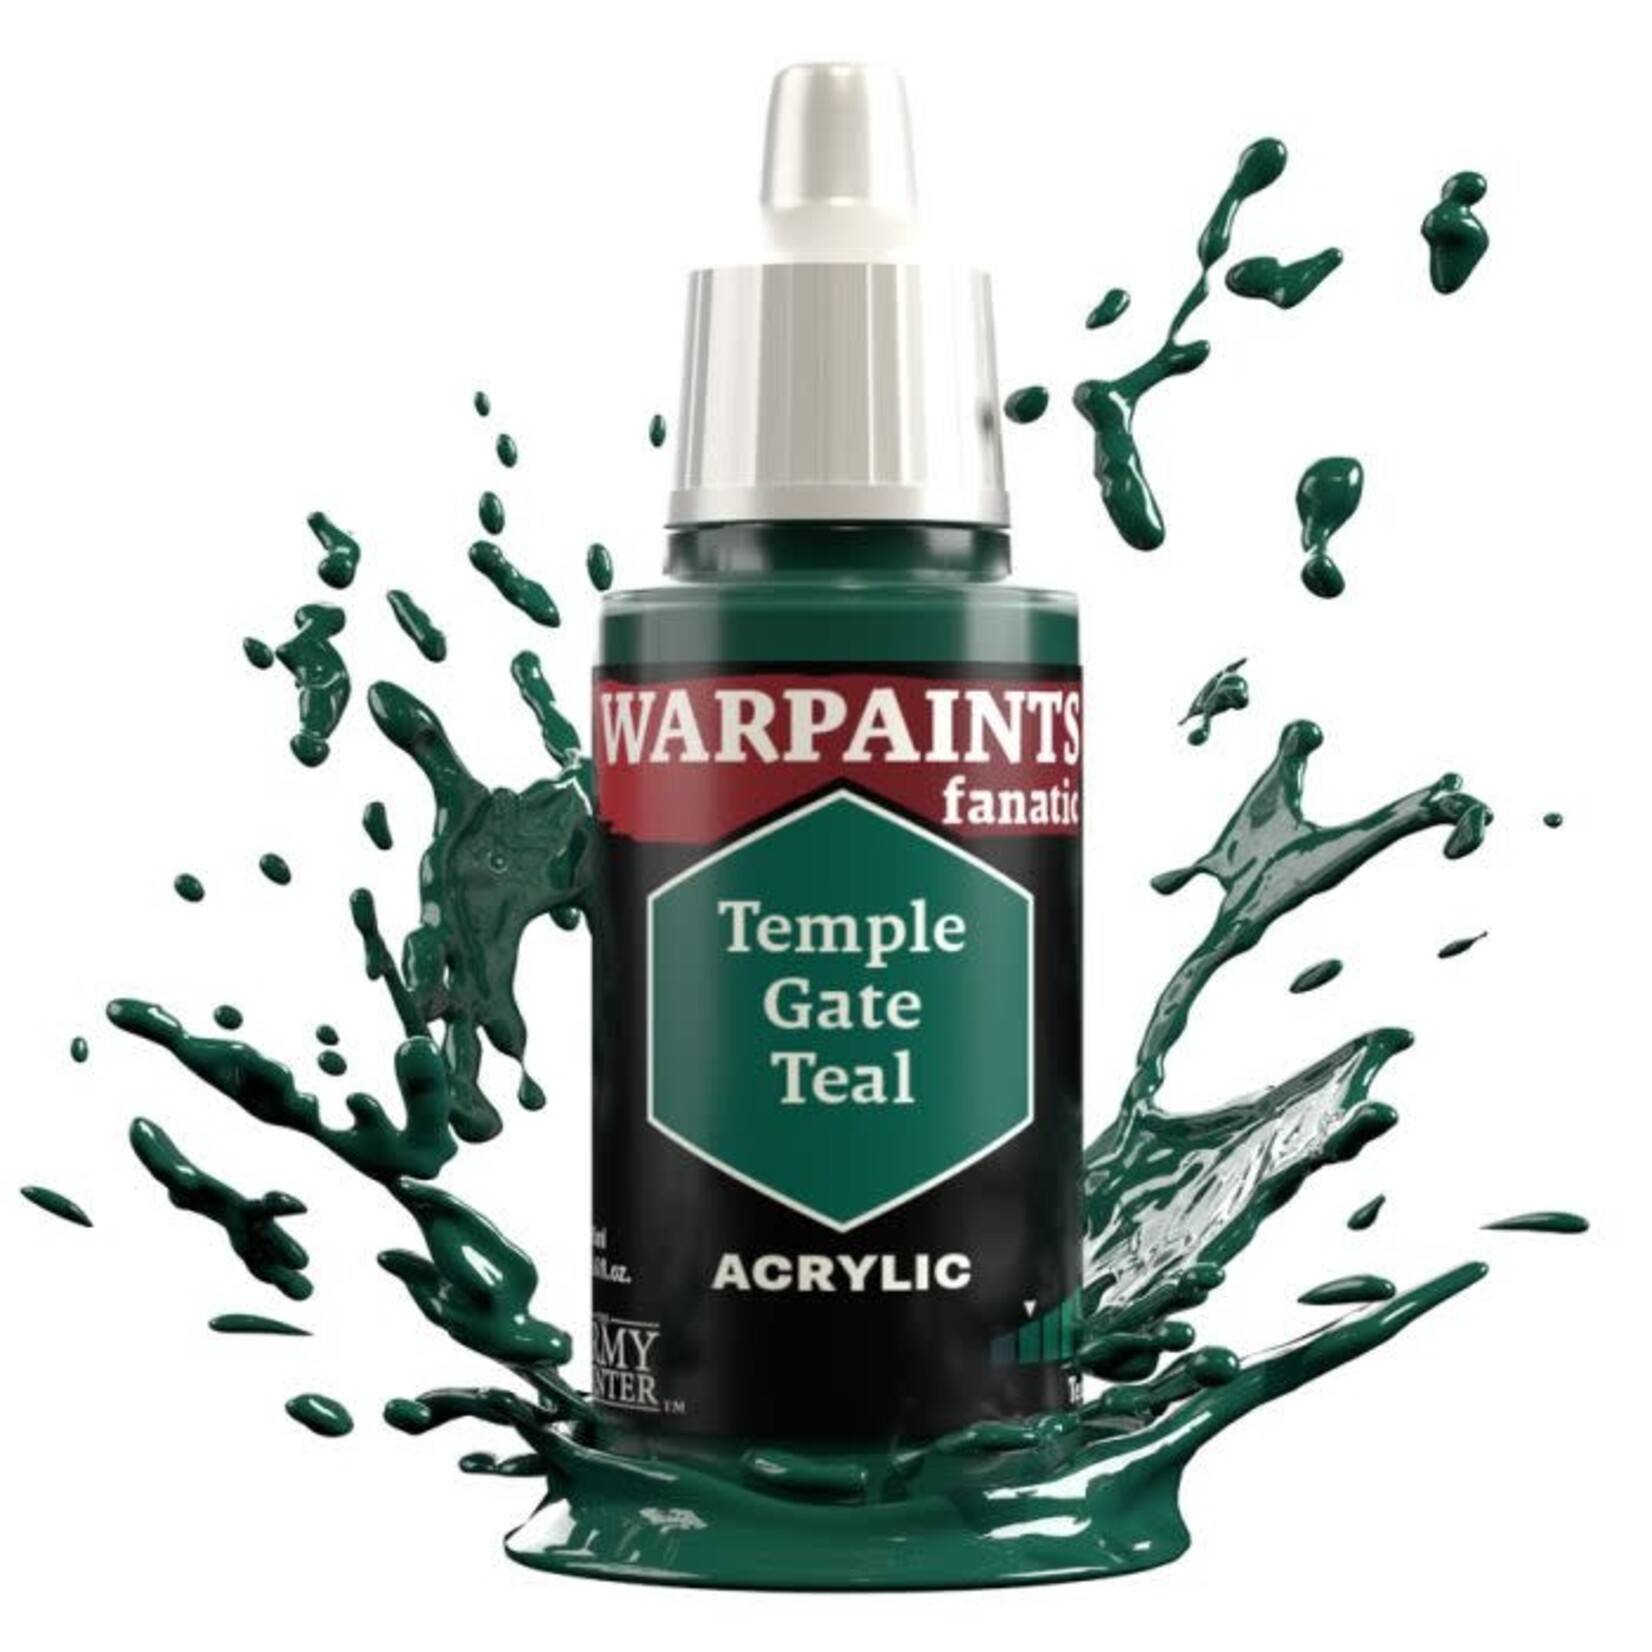 The Army Painter The Army Painter Warpaints Fanatic Temple Gate Teal 18ml